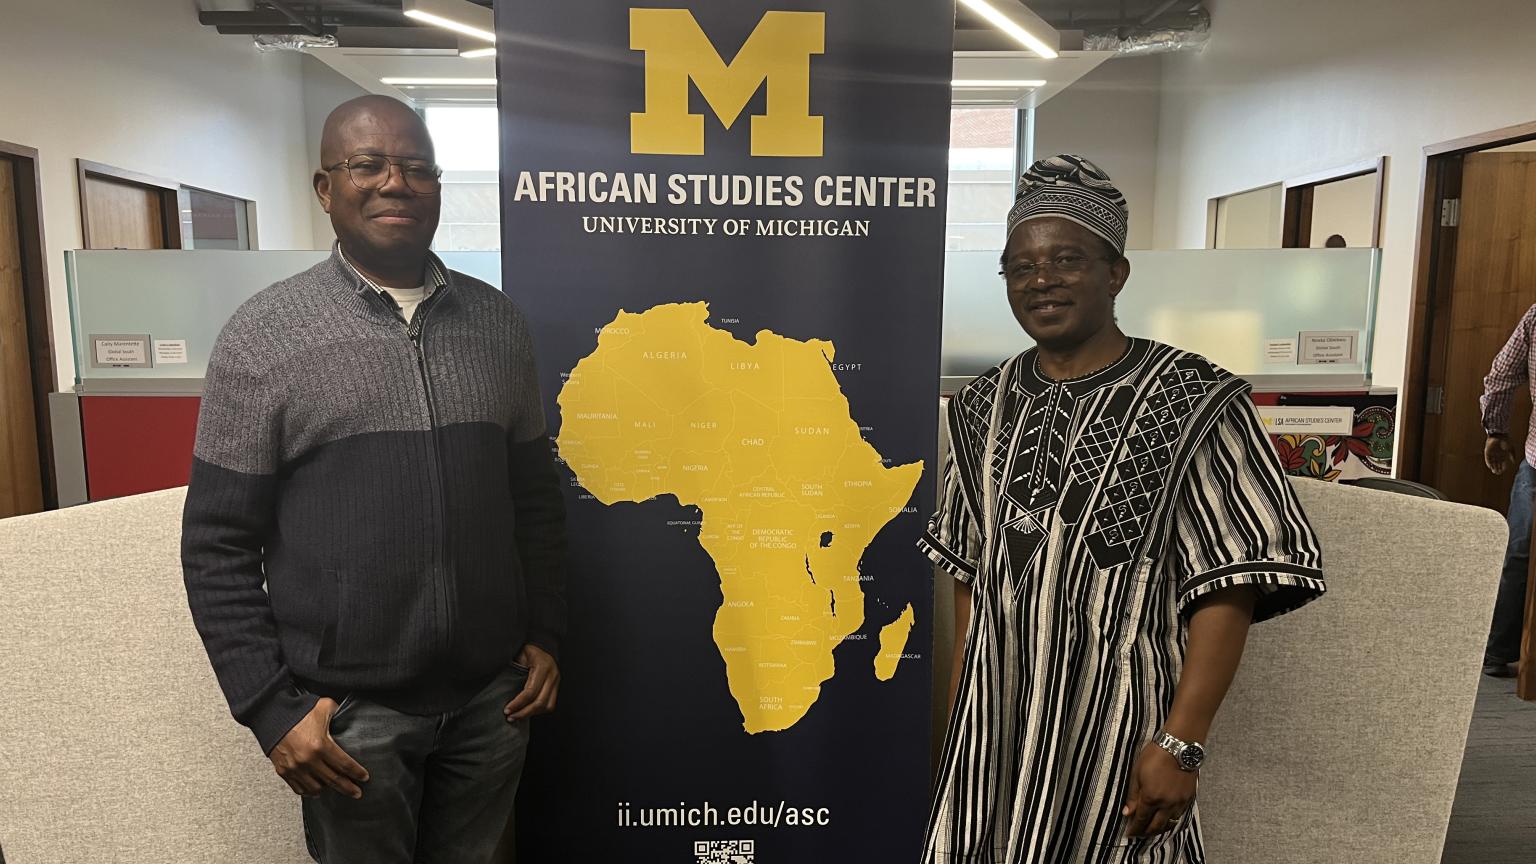 photo of Omolade Adunbi, Ph.D., M.Phil., M.A., Director Academic Programs at the Africa Studies Center and Dr. Njamnshi